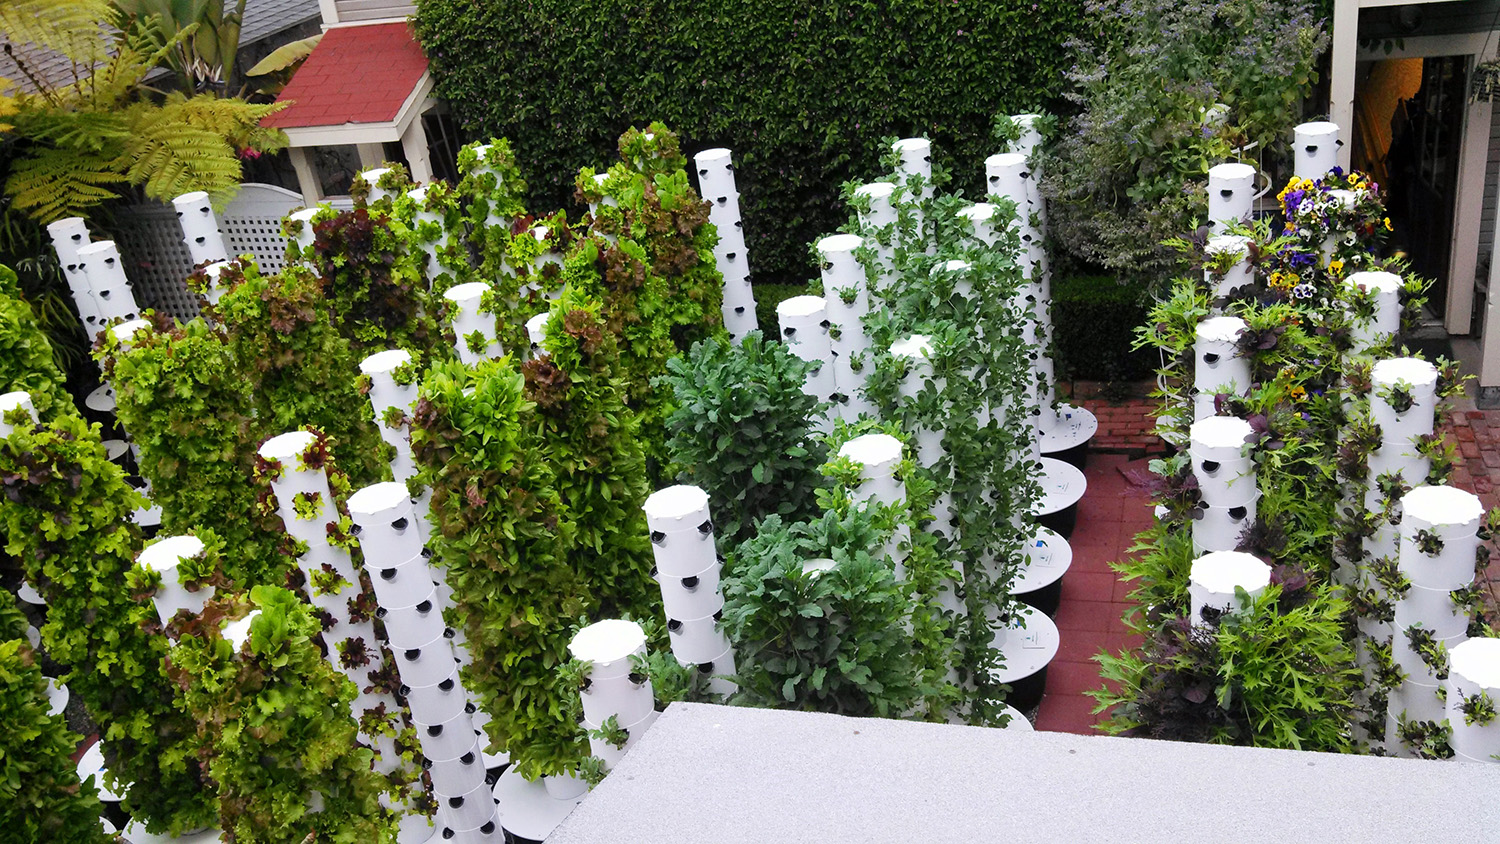 Say goodbye to traditional gardening methods and embrace the future with aeroponic tower gardening. Overcome obstacles and reap the rewards!